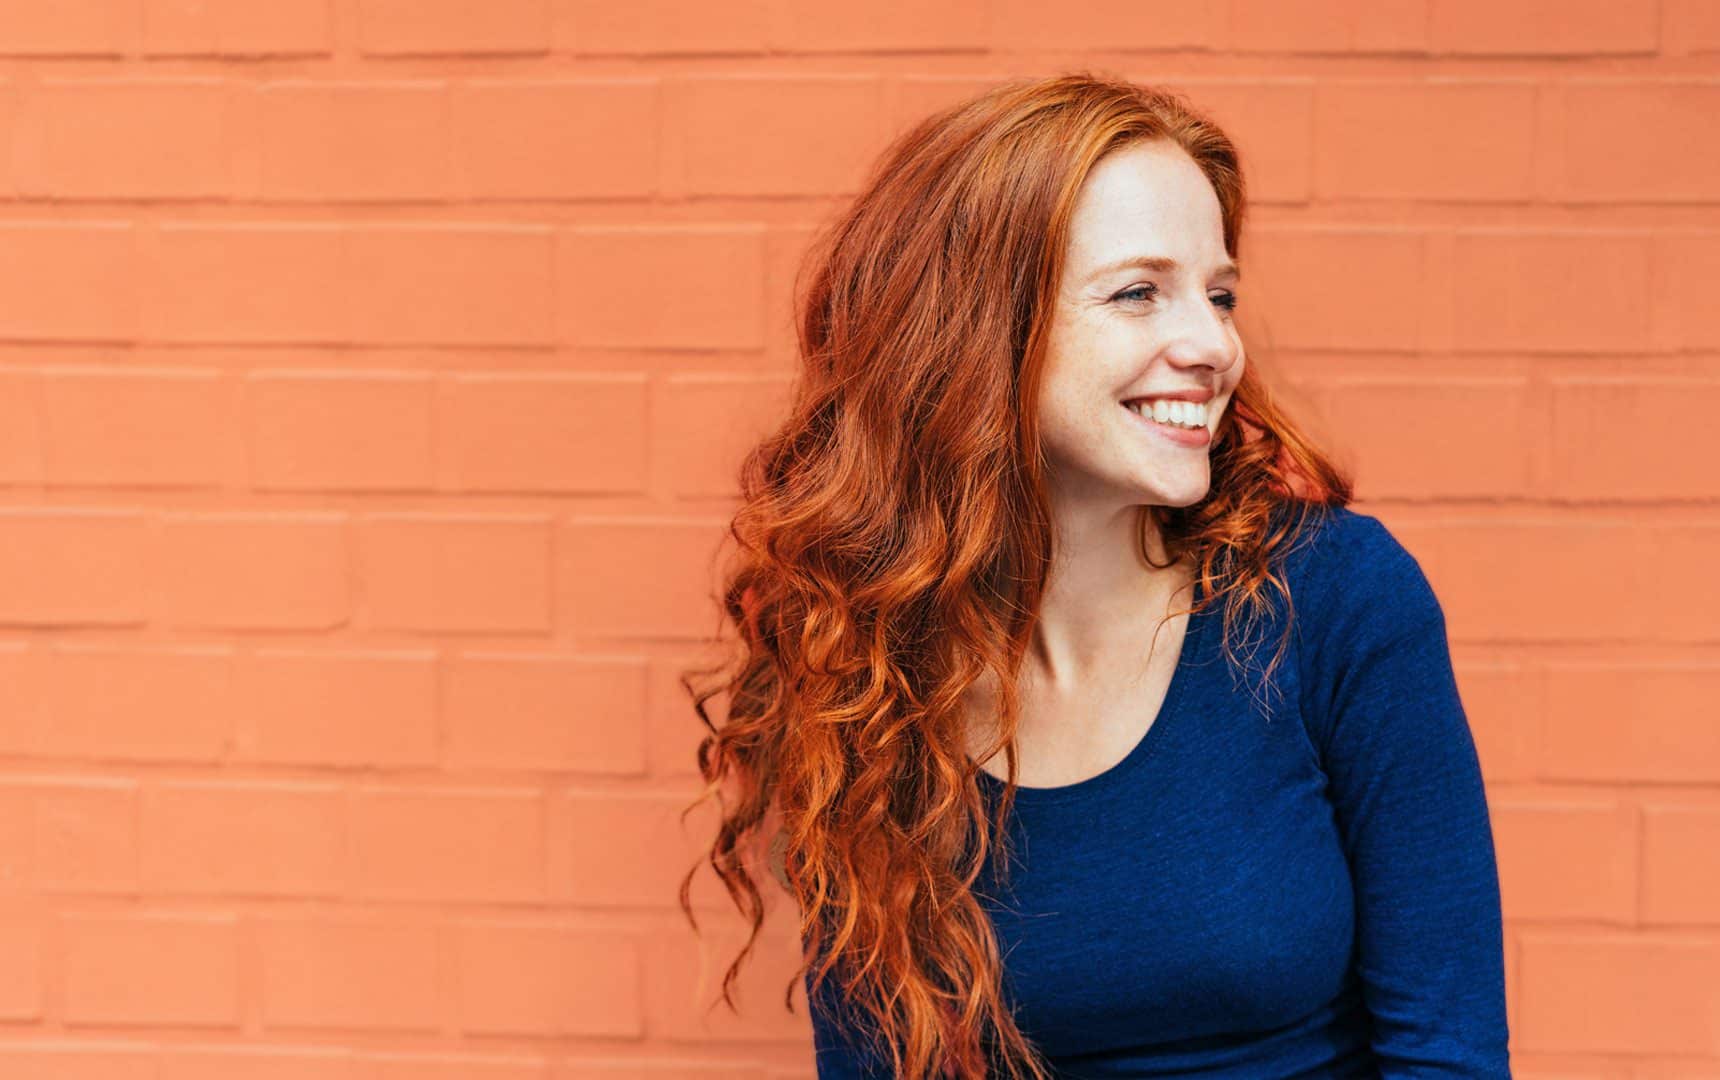 Woman smiling and looking right against an orange brick wall